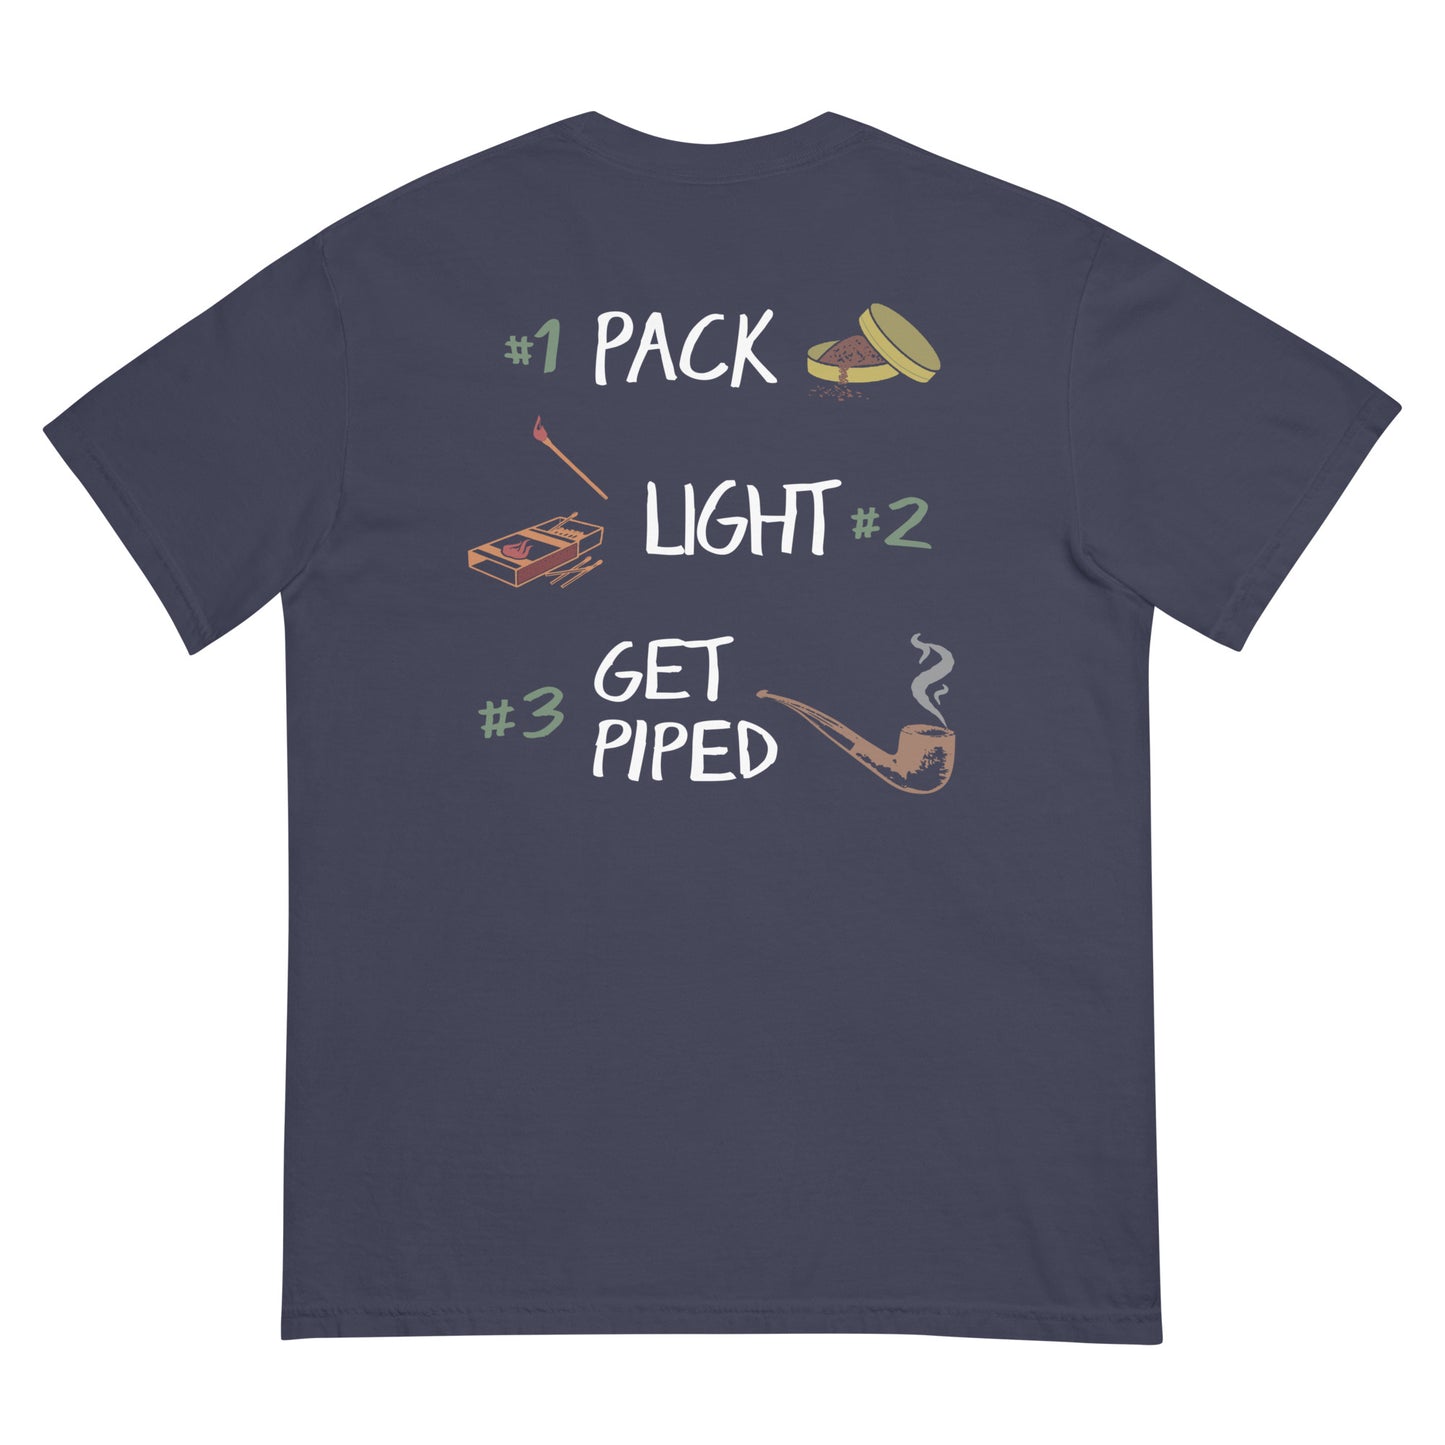 “Pack. Light. Get Piped.” Tee